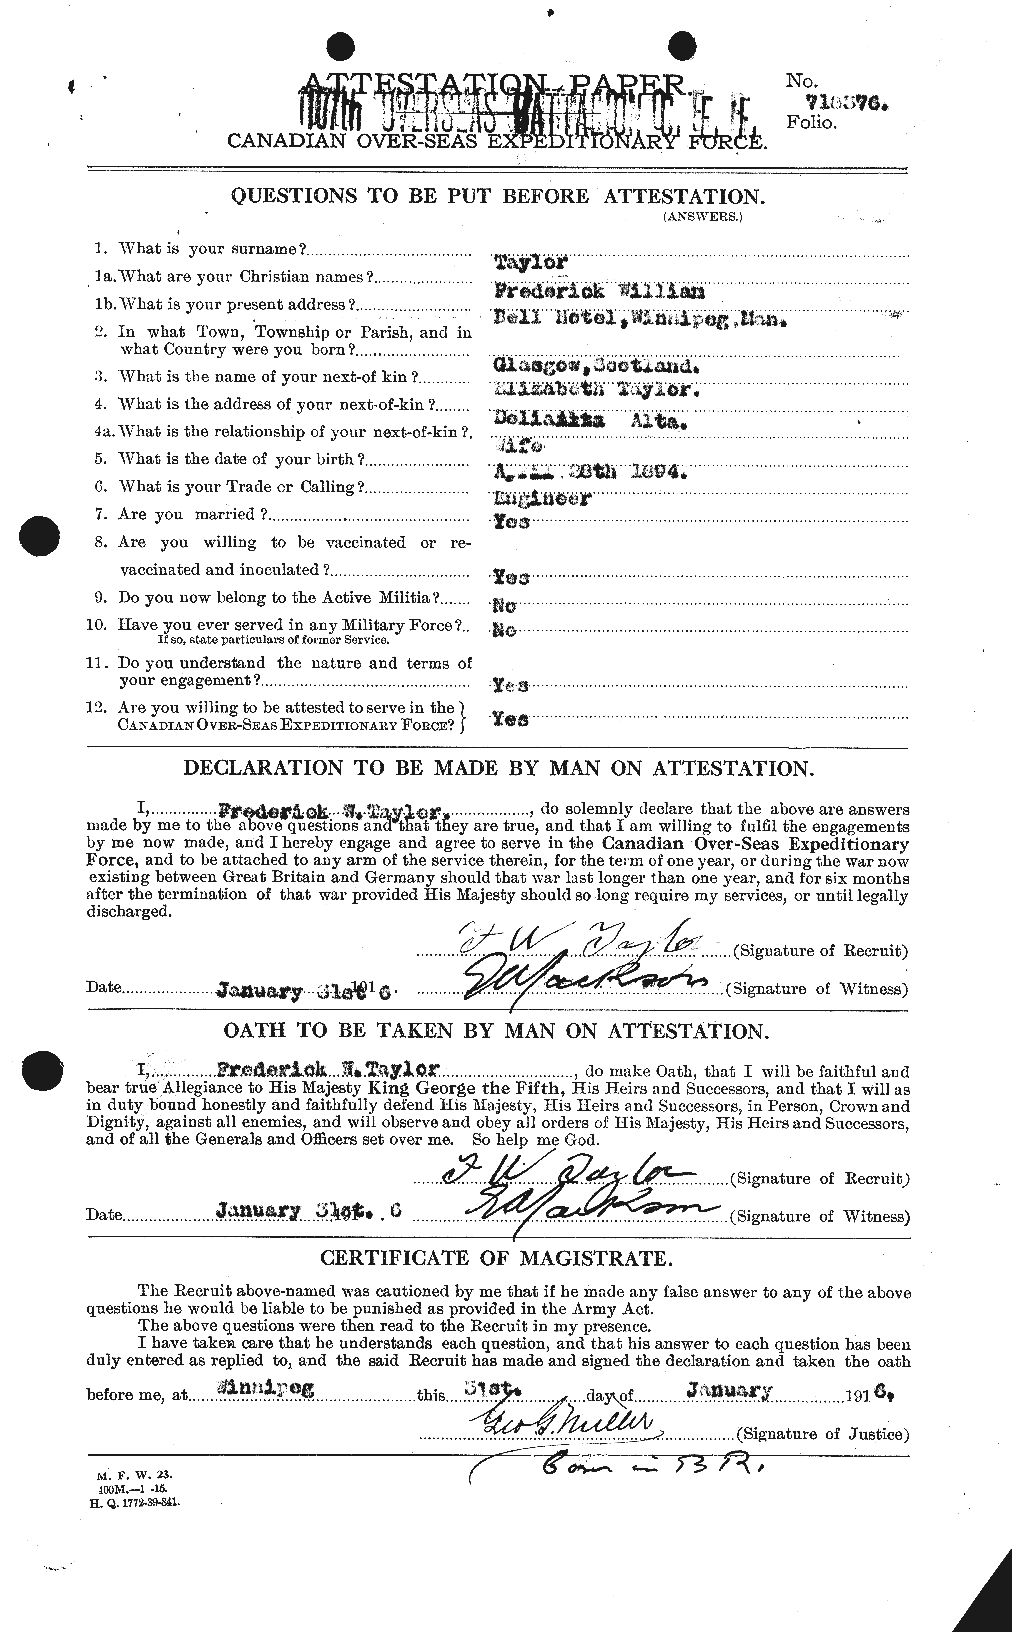 Personnel Records of the First World War - CEF 625828a